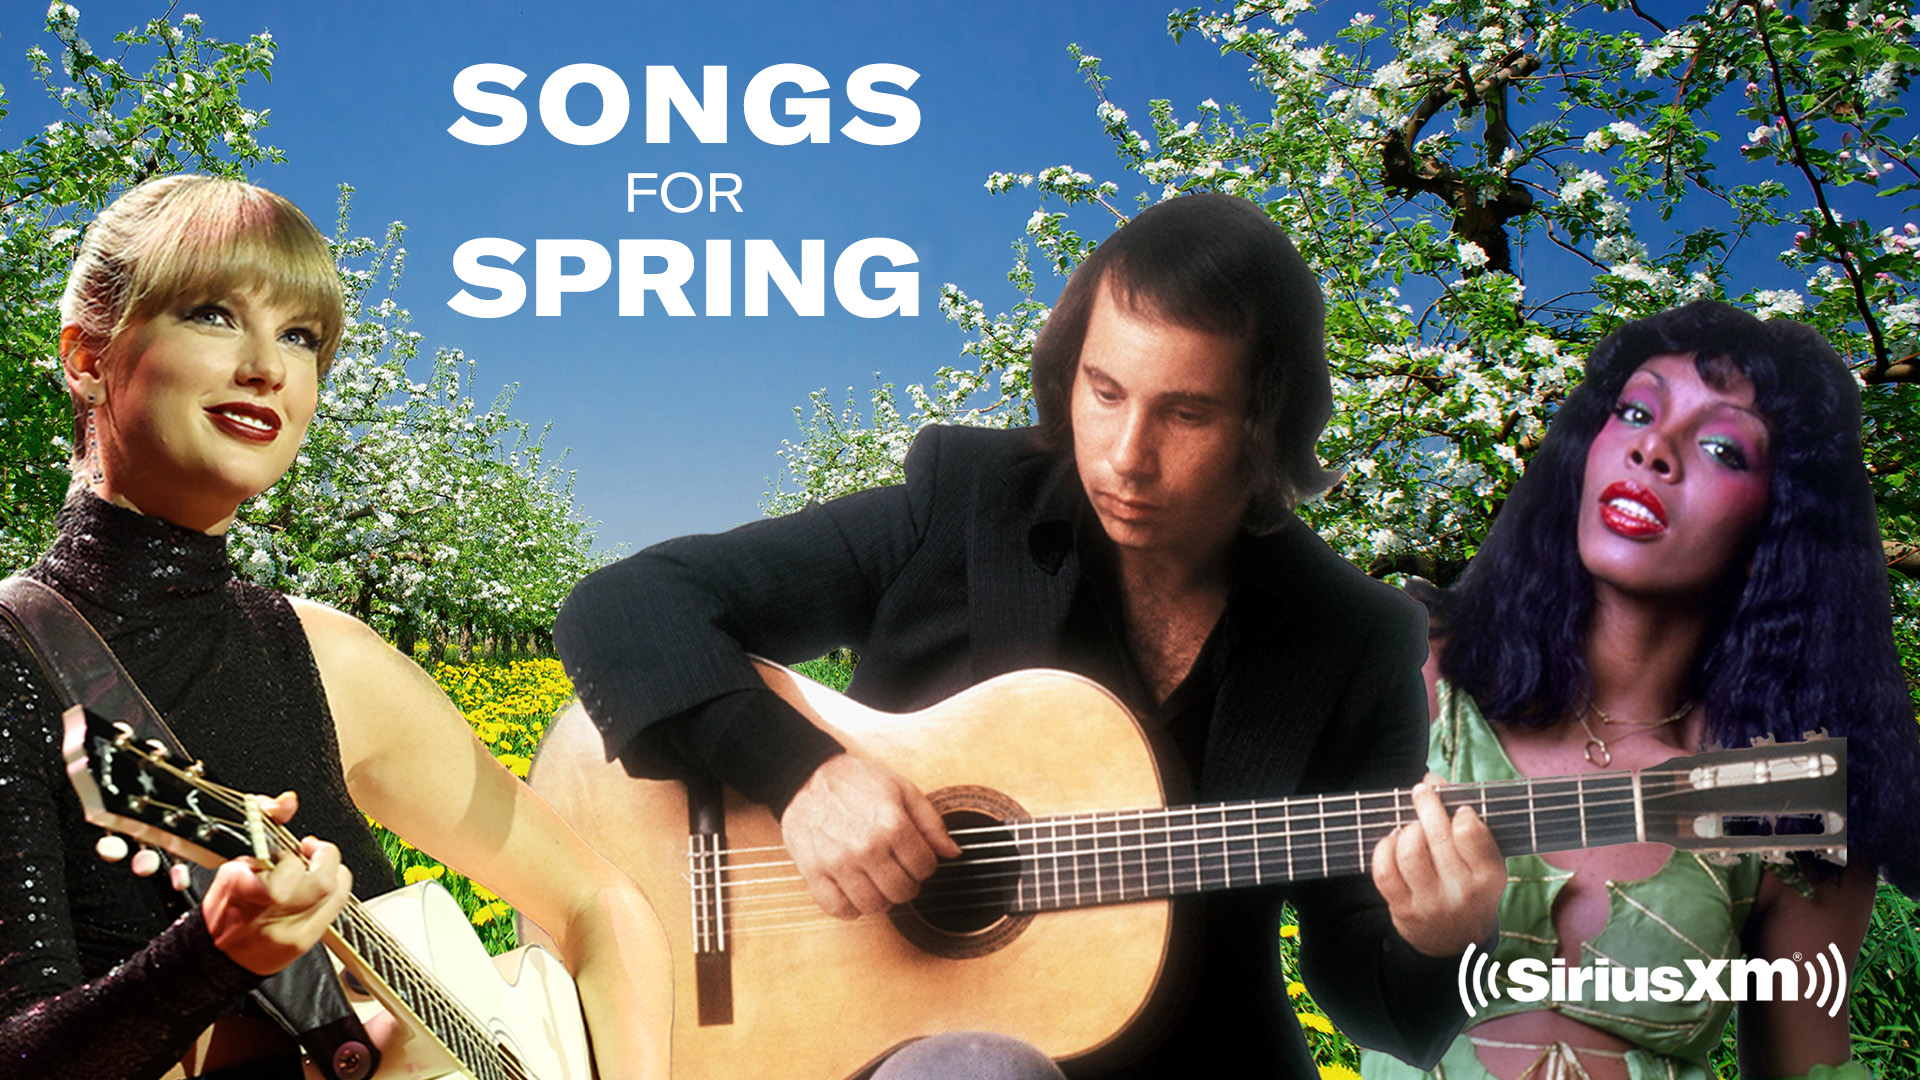 Songs for Spring